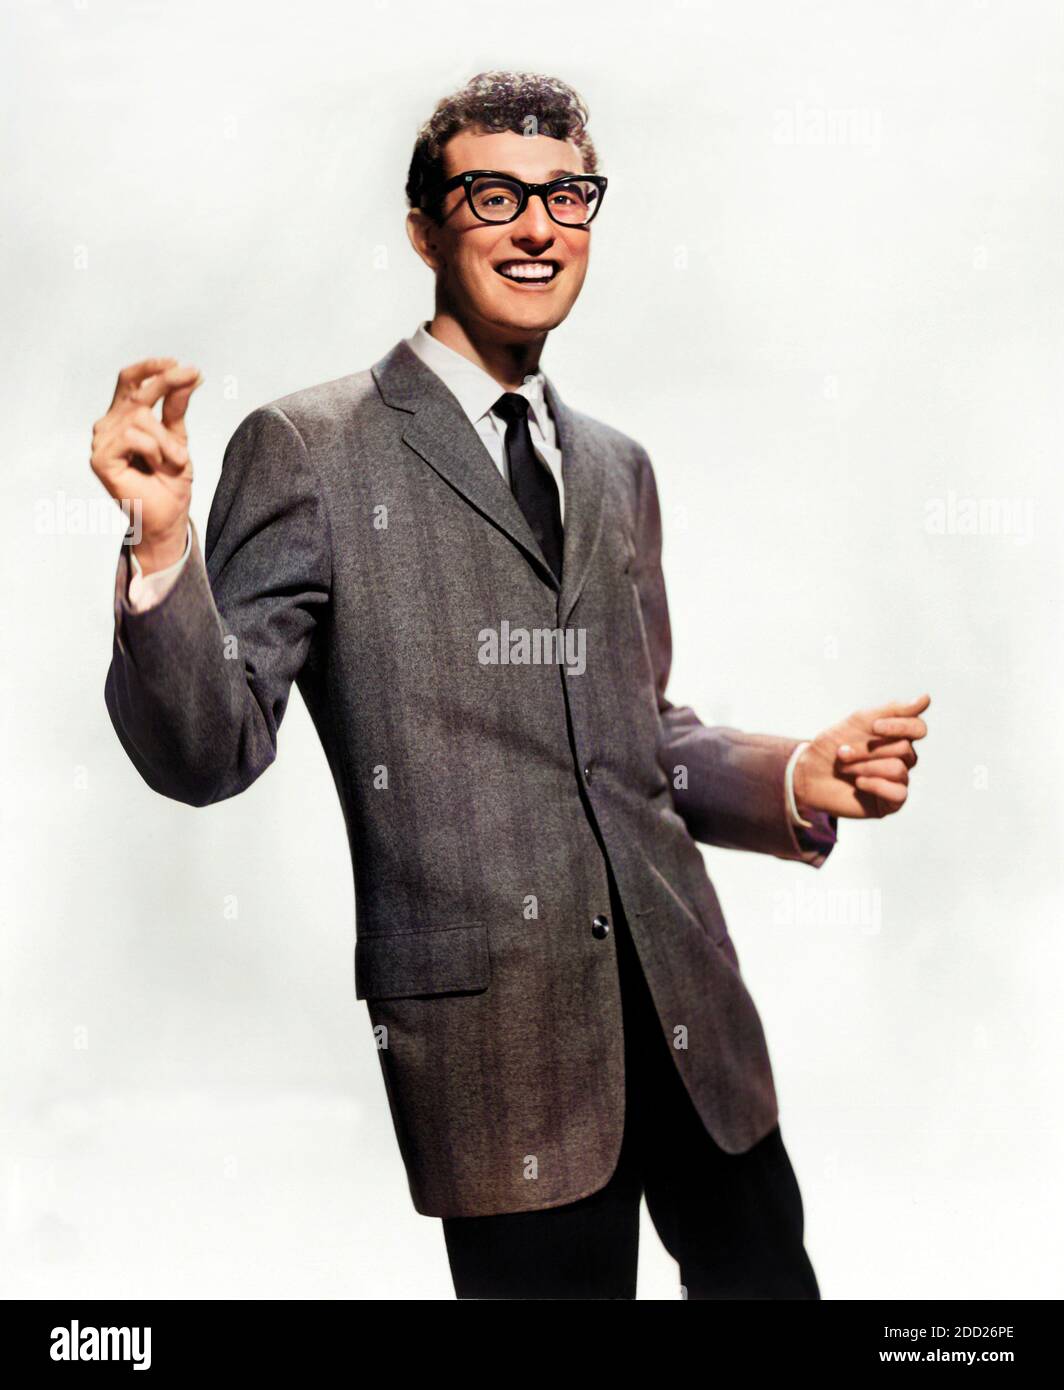 1958 ca. , USA : The celebrated  Rock'n Roll  star , guitarist , singer and songwriter BUDDY HOLLY ( 1936 - 1959 ). Buddy Holly dead on the ill-fated flight tyhe day 3 february 1959 that crashed on Clear Lake and killed him and also J.P. The Big Bopper Richardson and Richie Valens . Unknown photographer for Brunswick Records . DIGITALLY COLORIZED .-  ROCKABILLY - POP MUSIC - ROCK AND ROLL - ROCK'N ROLL - MUSICA LEGGERA - portrait - ritratto  - musicista - musician - chitarrista - musicista - ROCK - portrait - ritratto - ANNI CINQUANTA - 50's - '50 - lens - smile - sorriso - disastro aereo - da Stock Photo